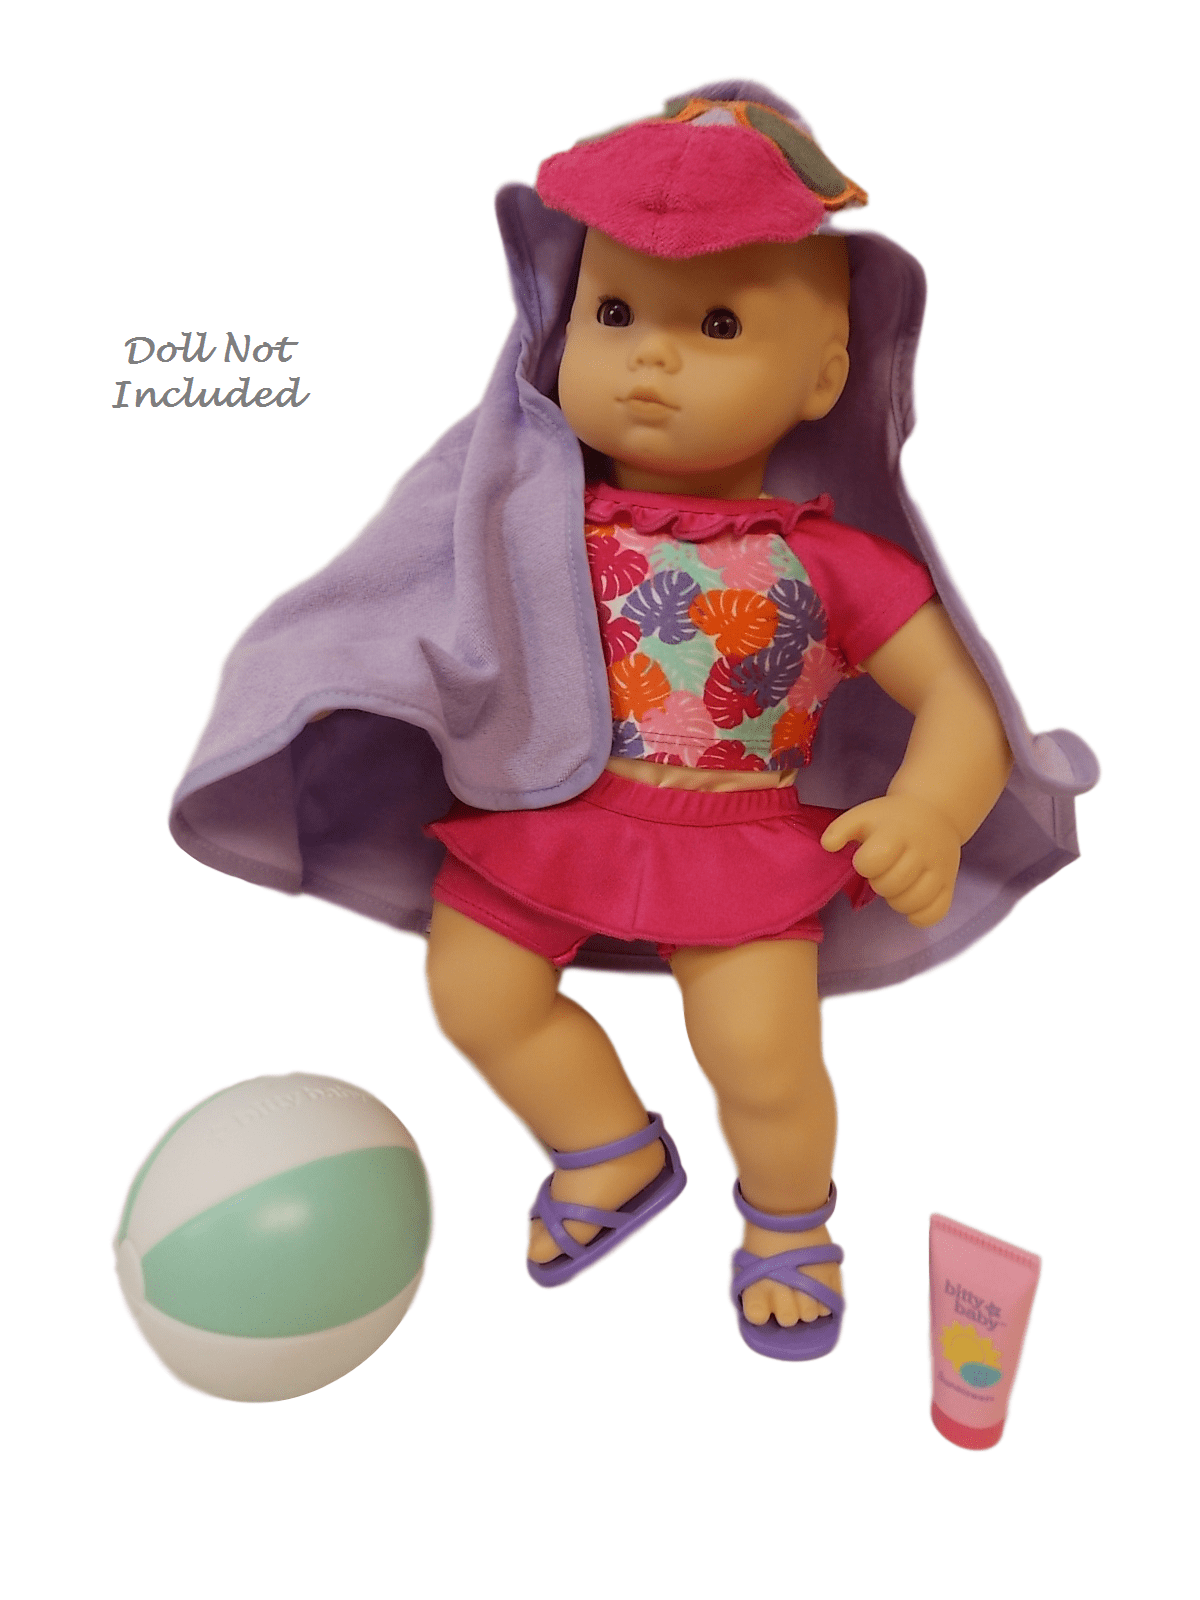 DOLL DRESS BITTY BABY TWINS OR ANY 15" DOLLS BEACH BALL CLOTHES 